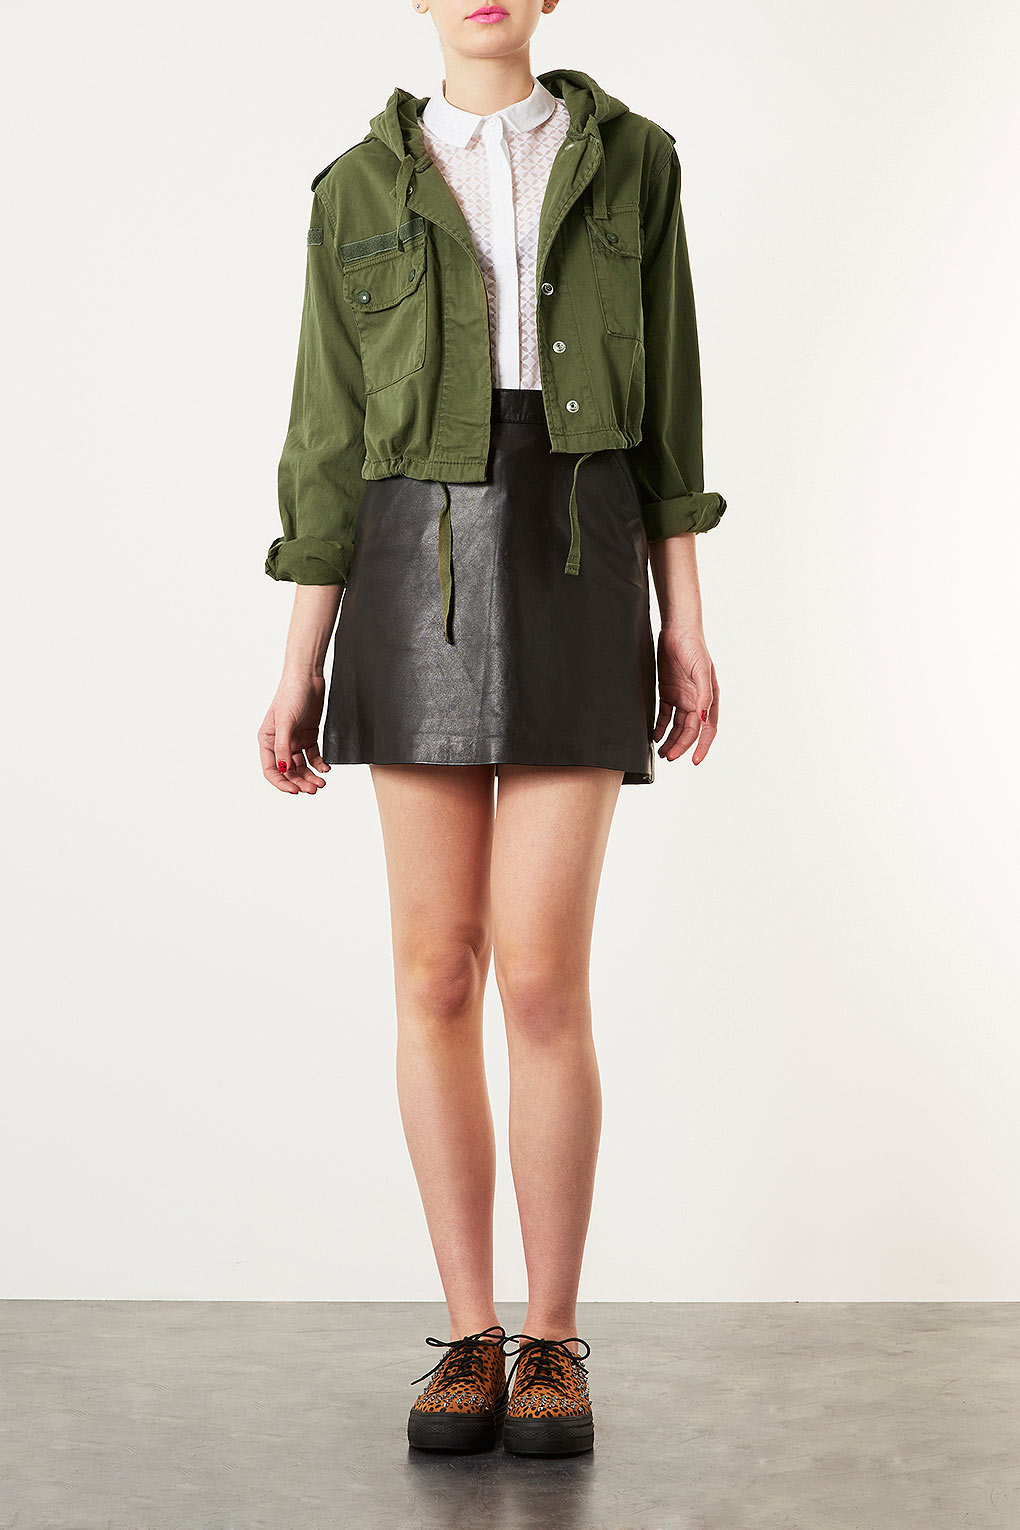 Lyst - Topshop Hooded Crop Army Jacket in Natural